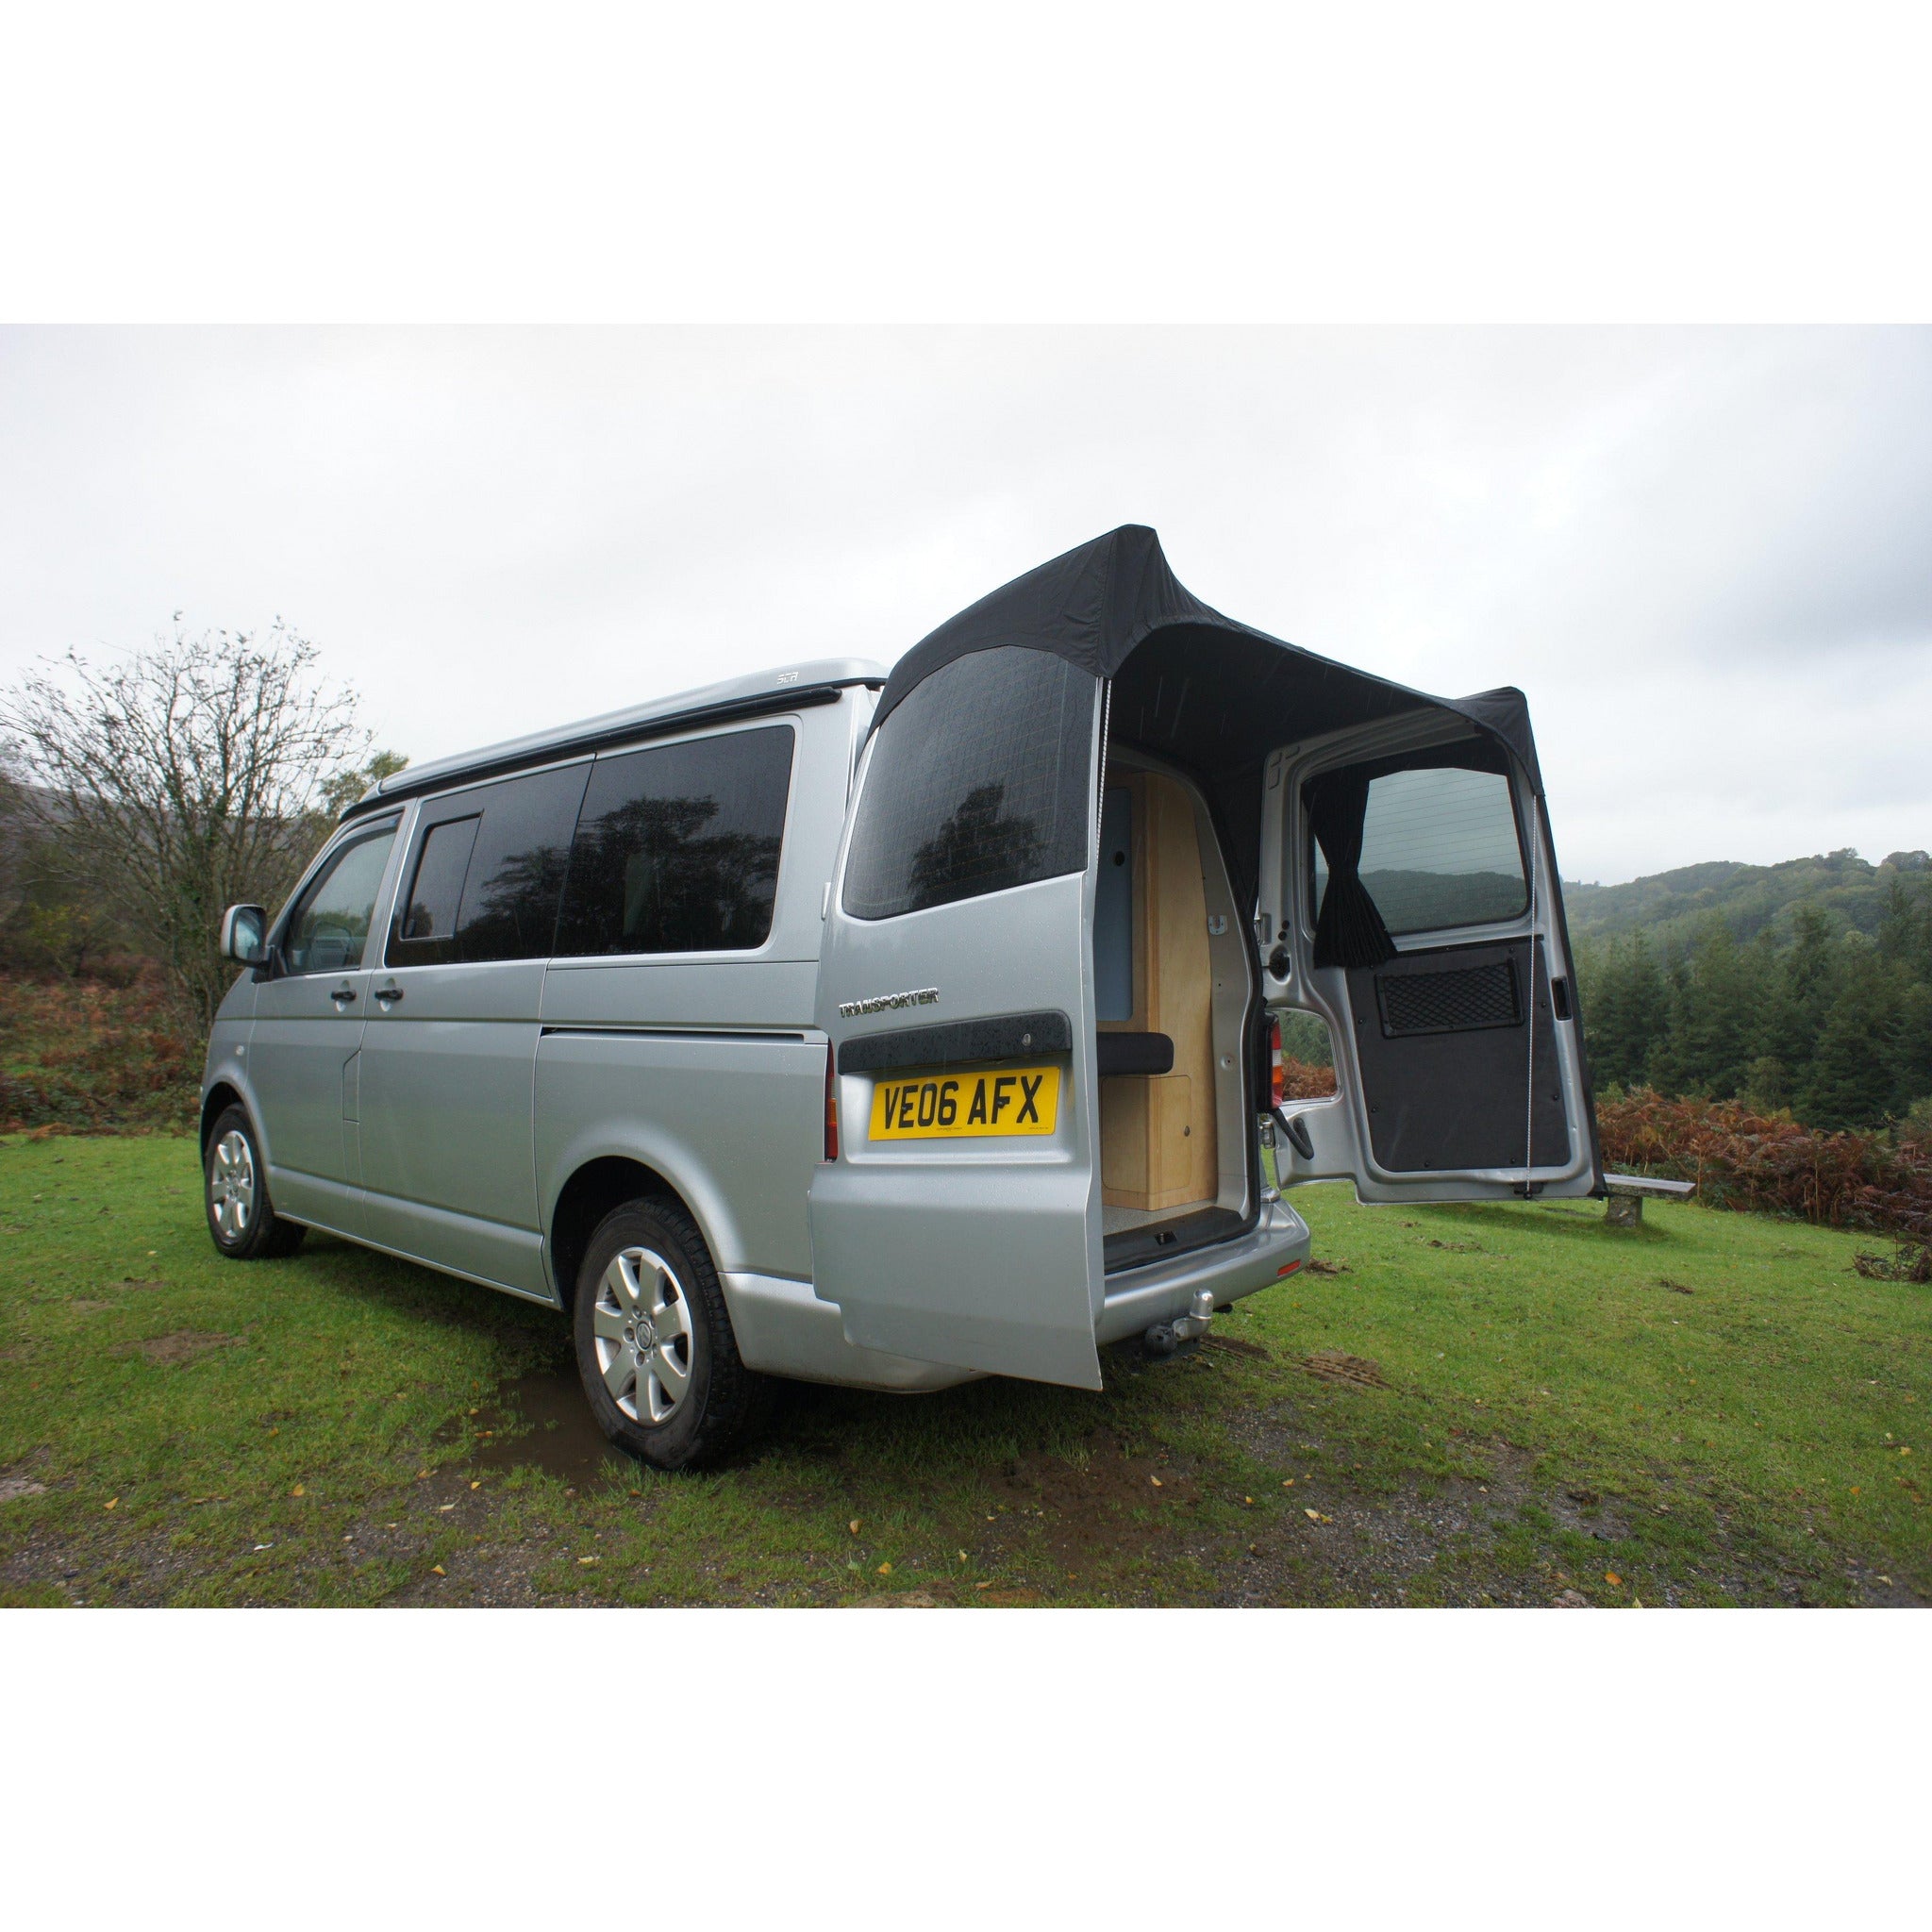 No Tailgate? No problem Barn Door Campervan Awning for VW T5/T6